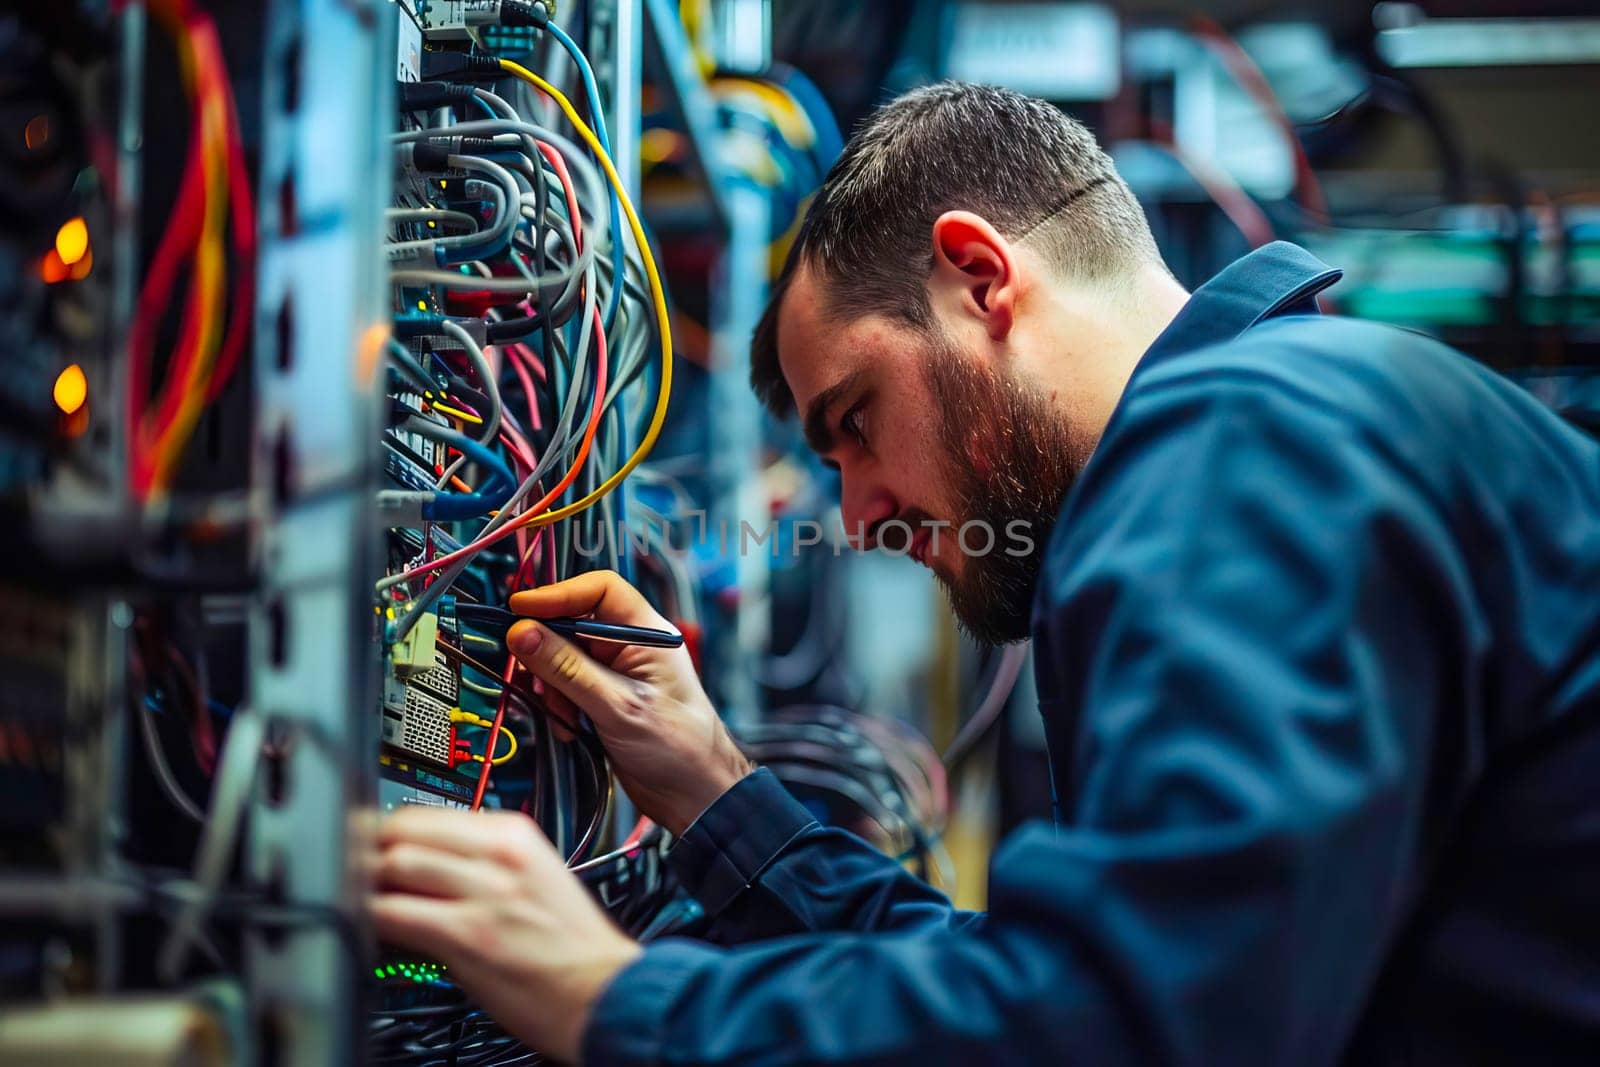 A professional IT specialist is seen working on a server in a server room.